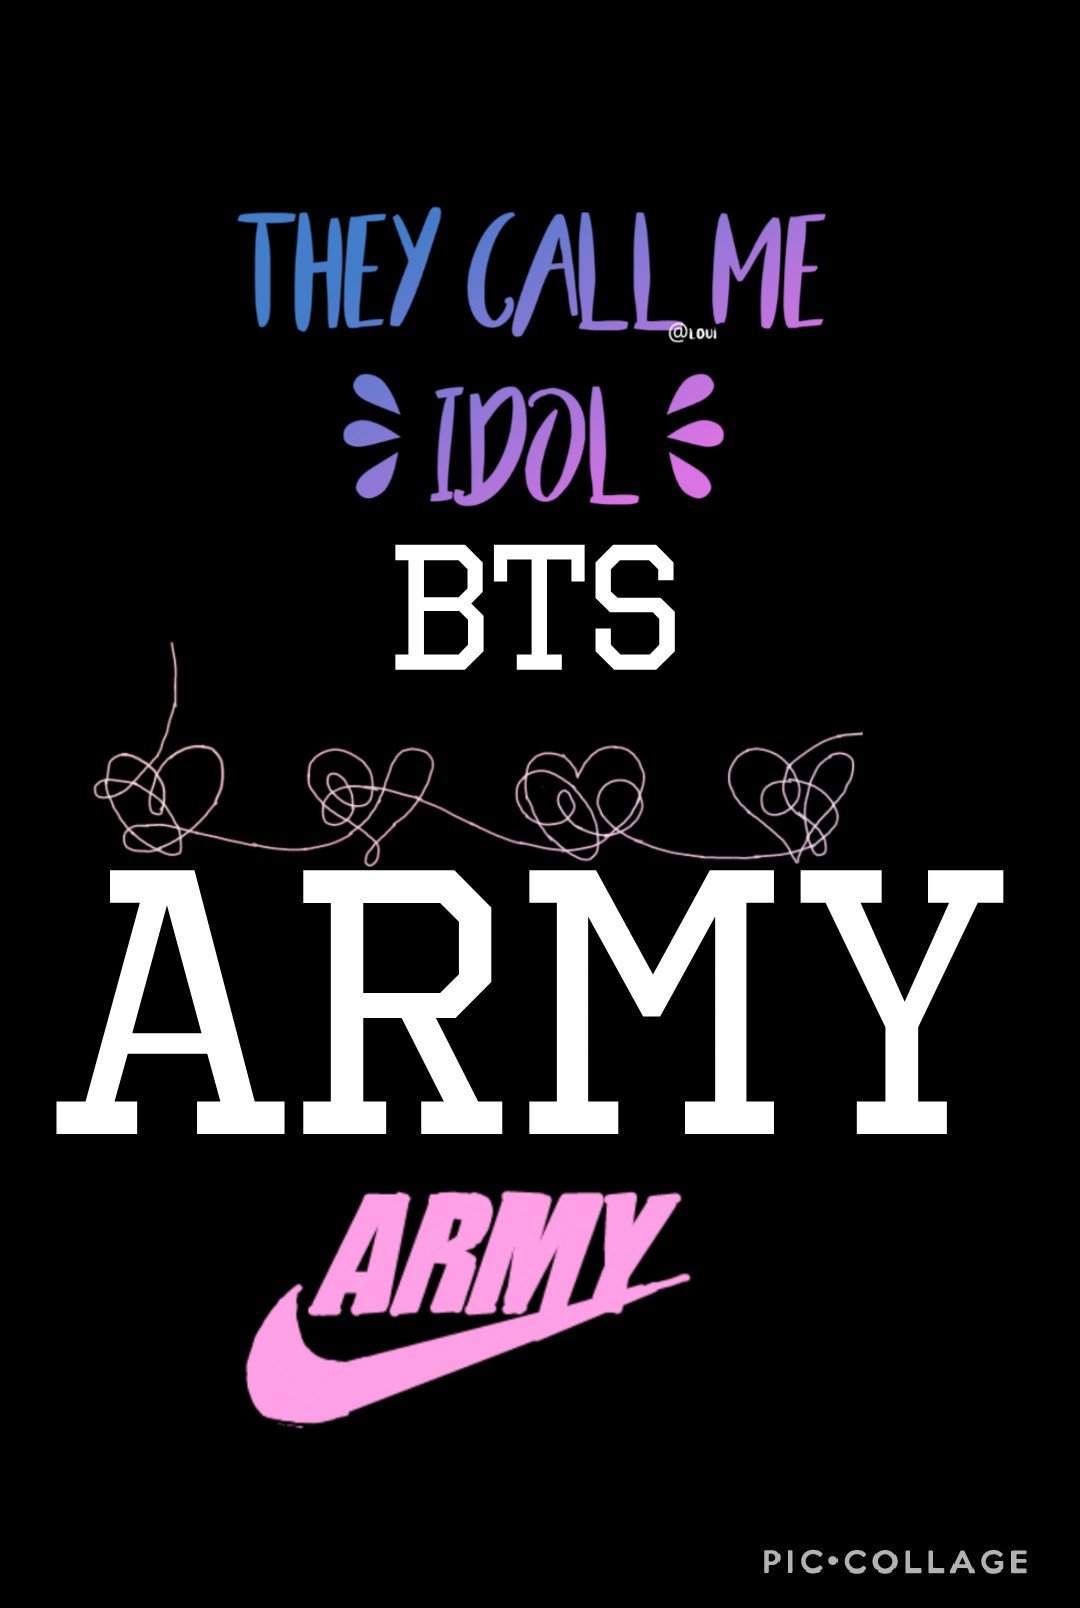 MORE BTS WALLPAPERS. ARMY's Amino